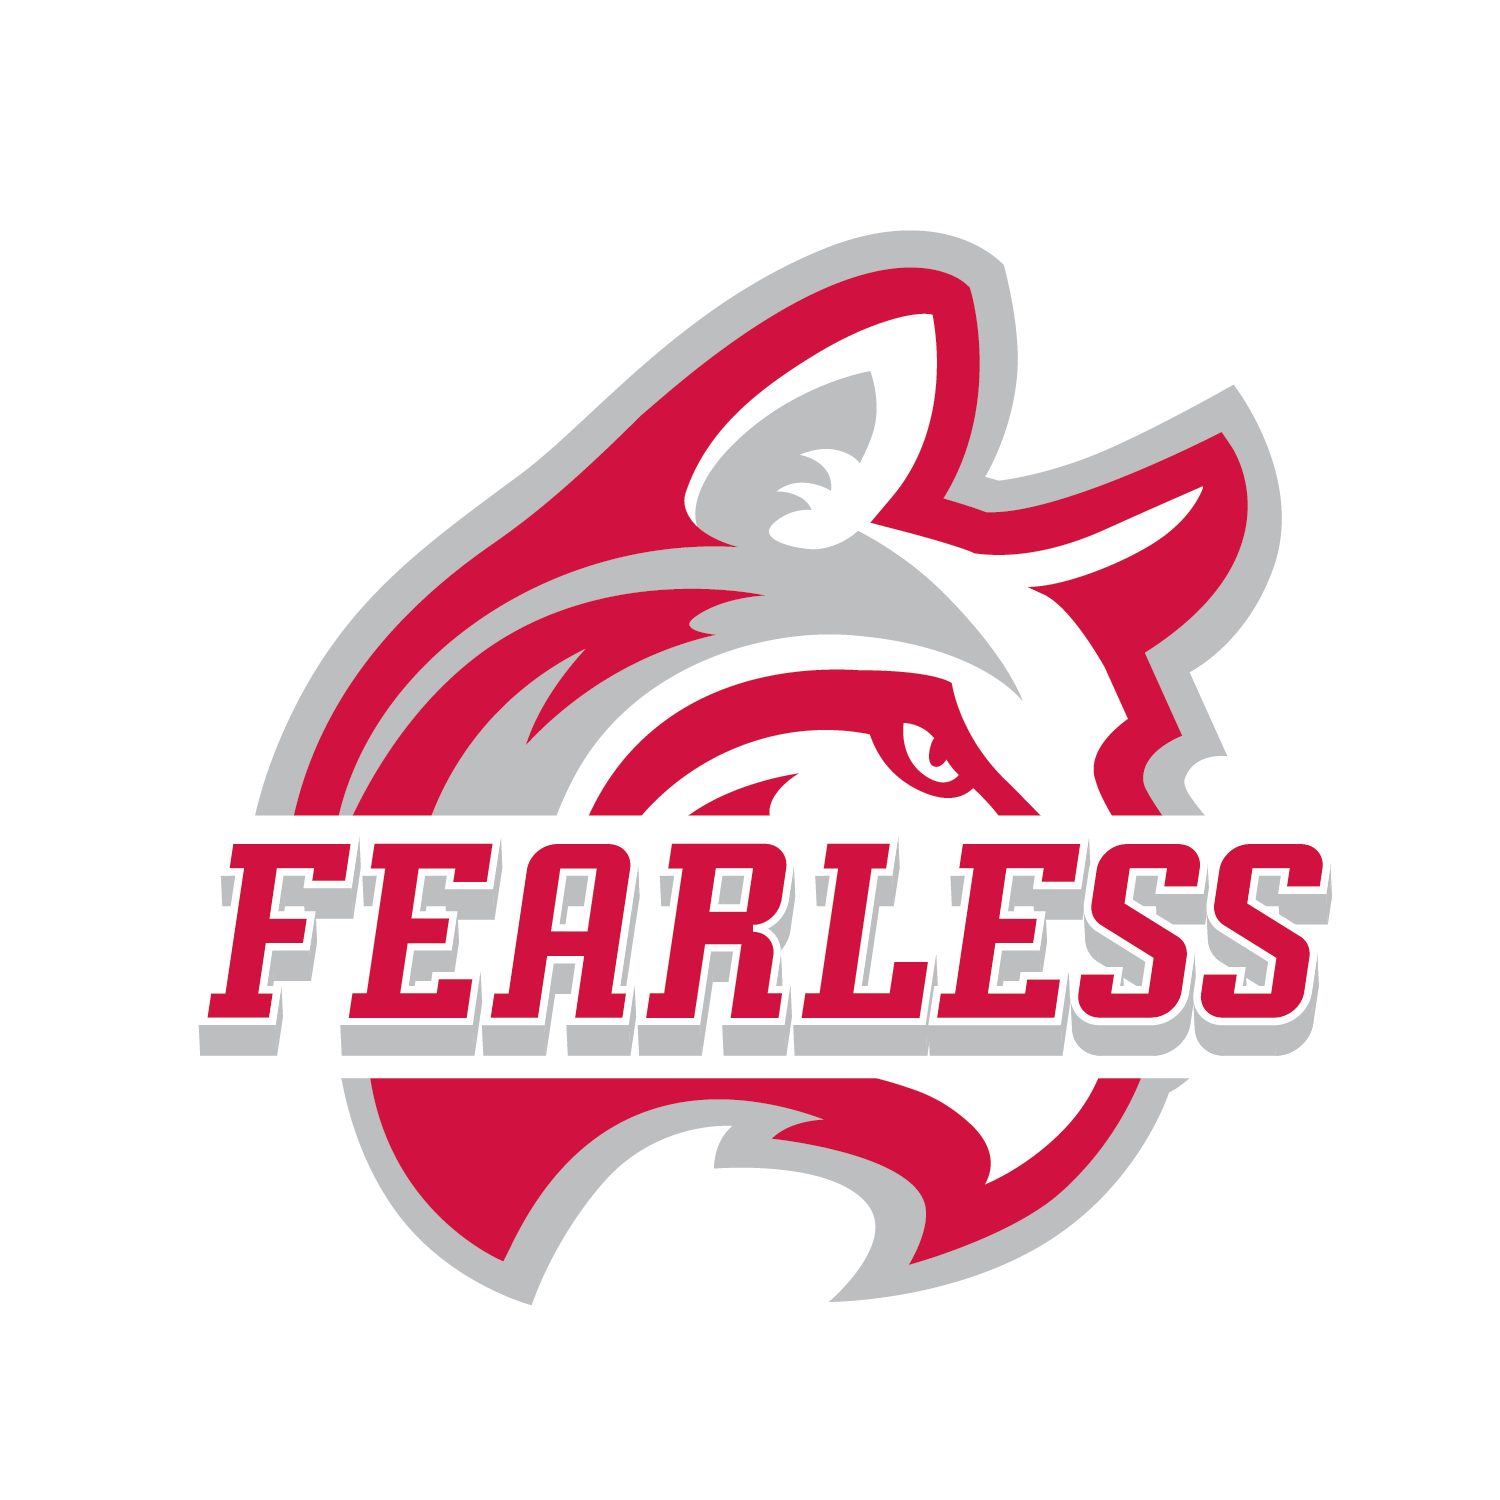 Fearless Logo - Fearless (100+ images in Collection) Page 2